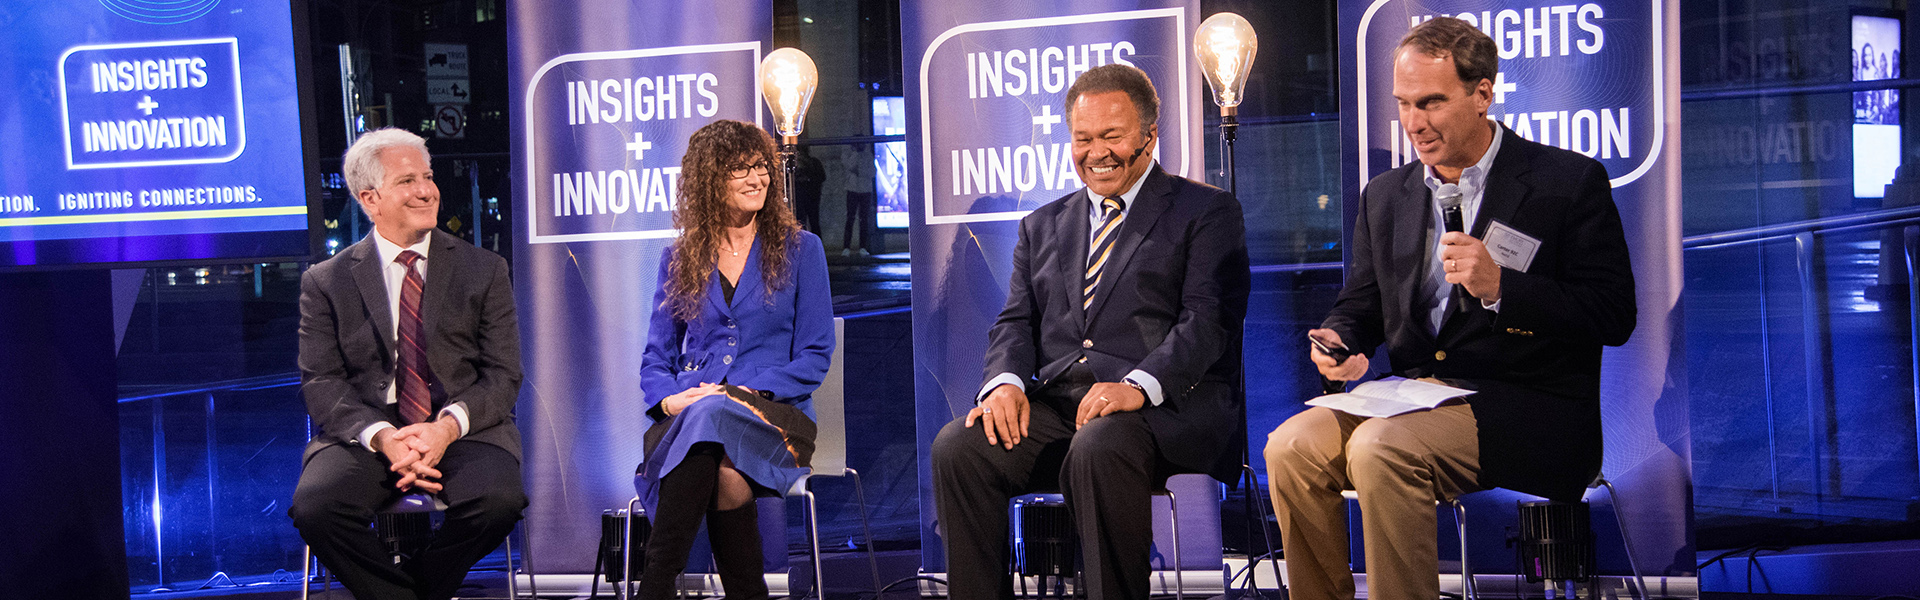 Insights and Innovations